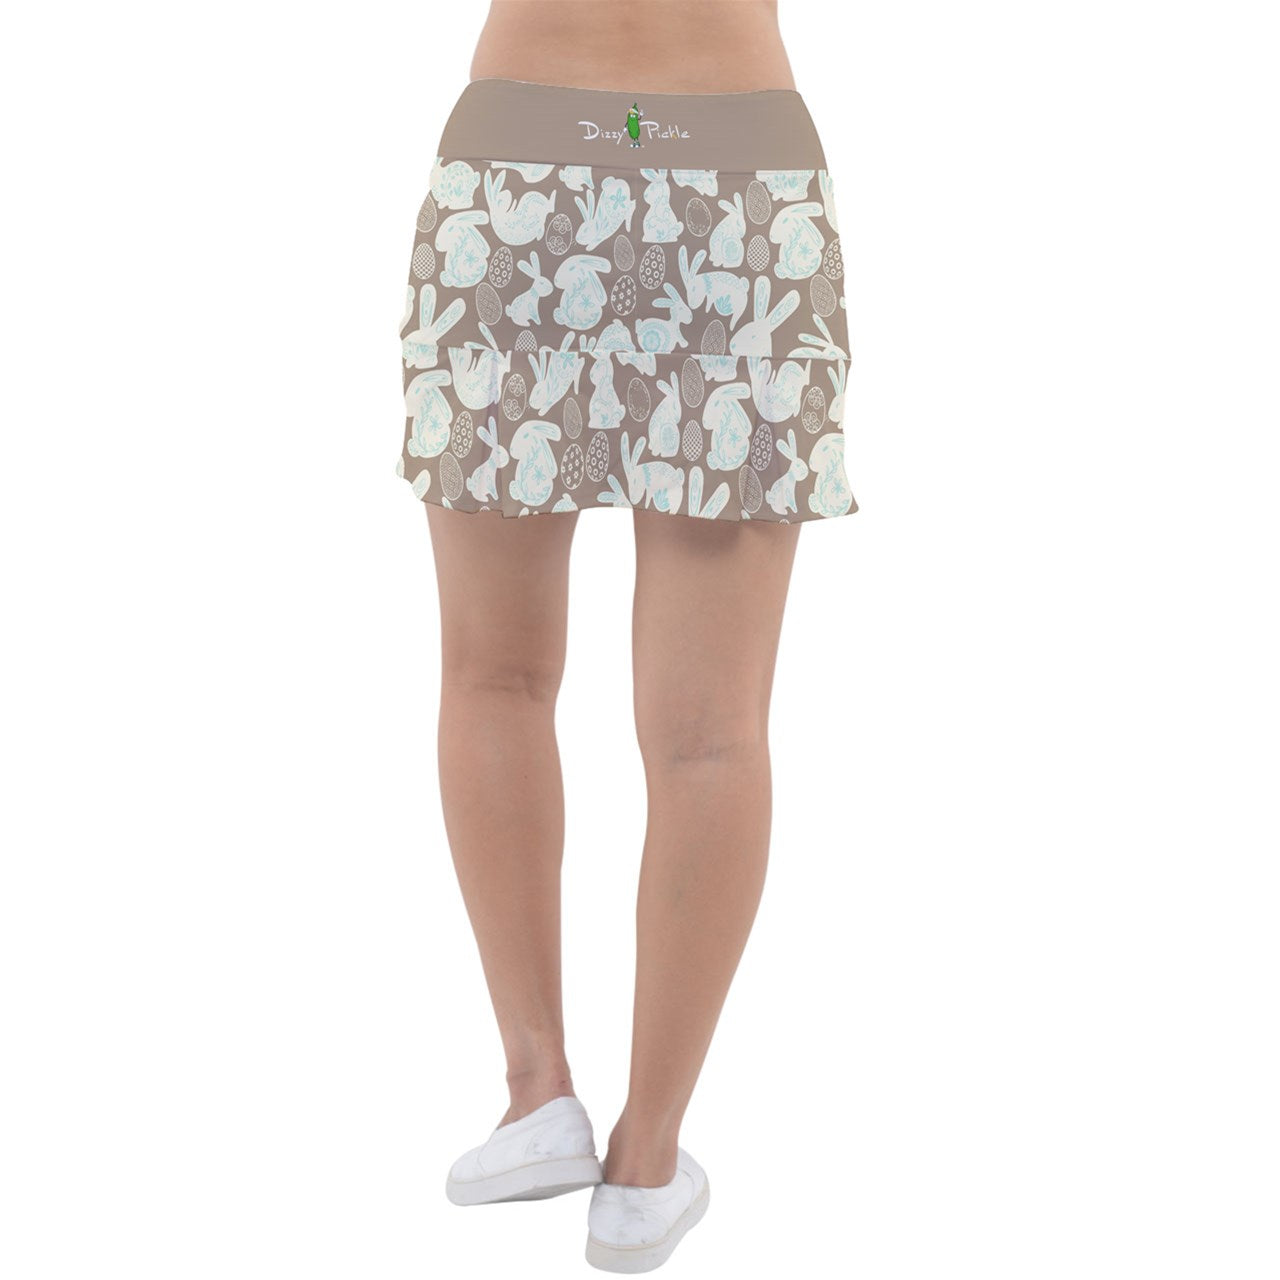 Dizzy Pickle Bunch o' Bunnies Classic Women's Pickleball Pleated Skorts with Inner Shorts & Pockets Caramel